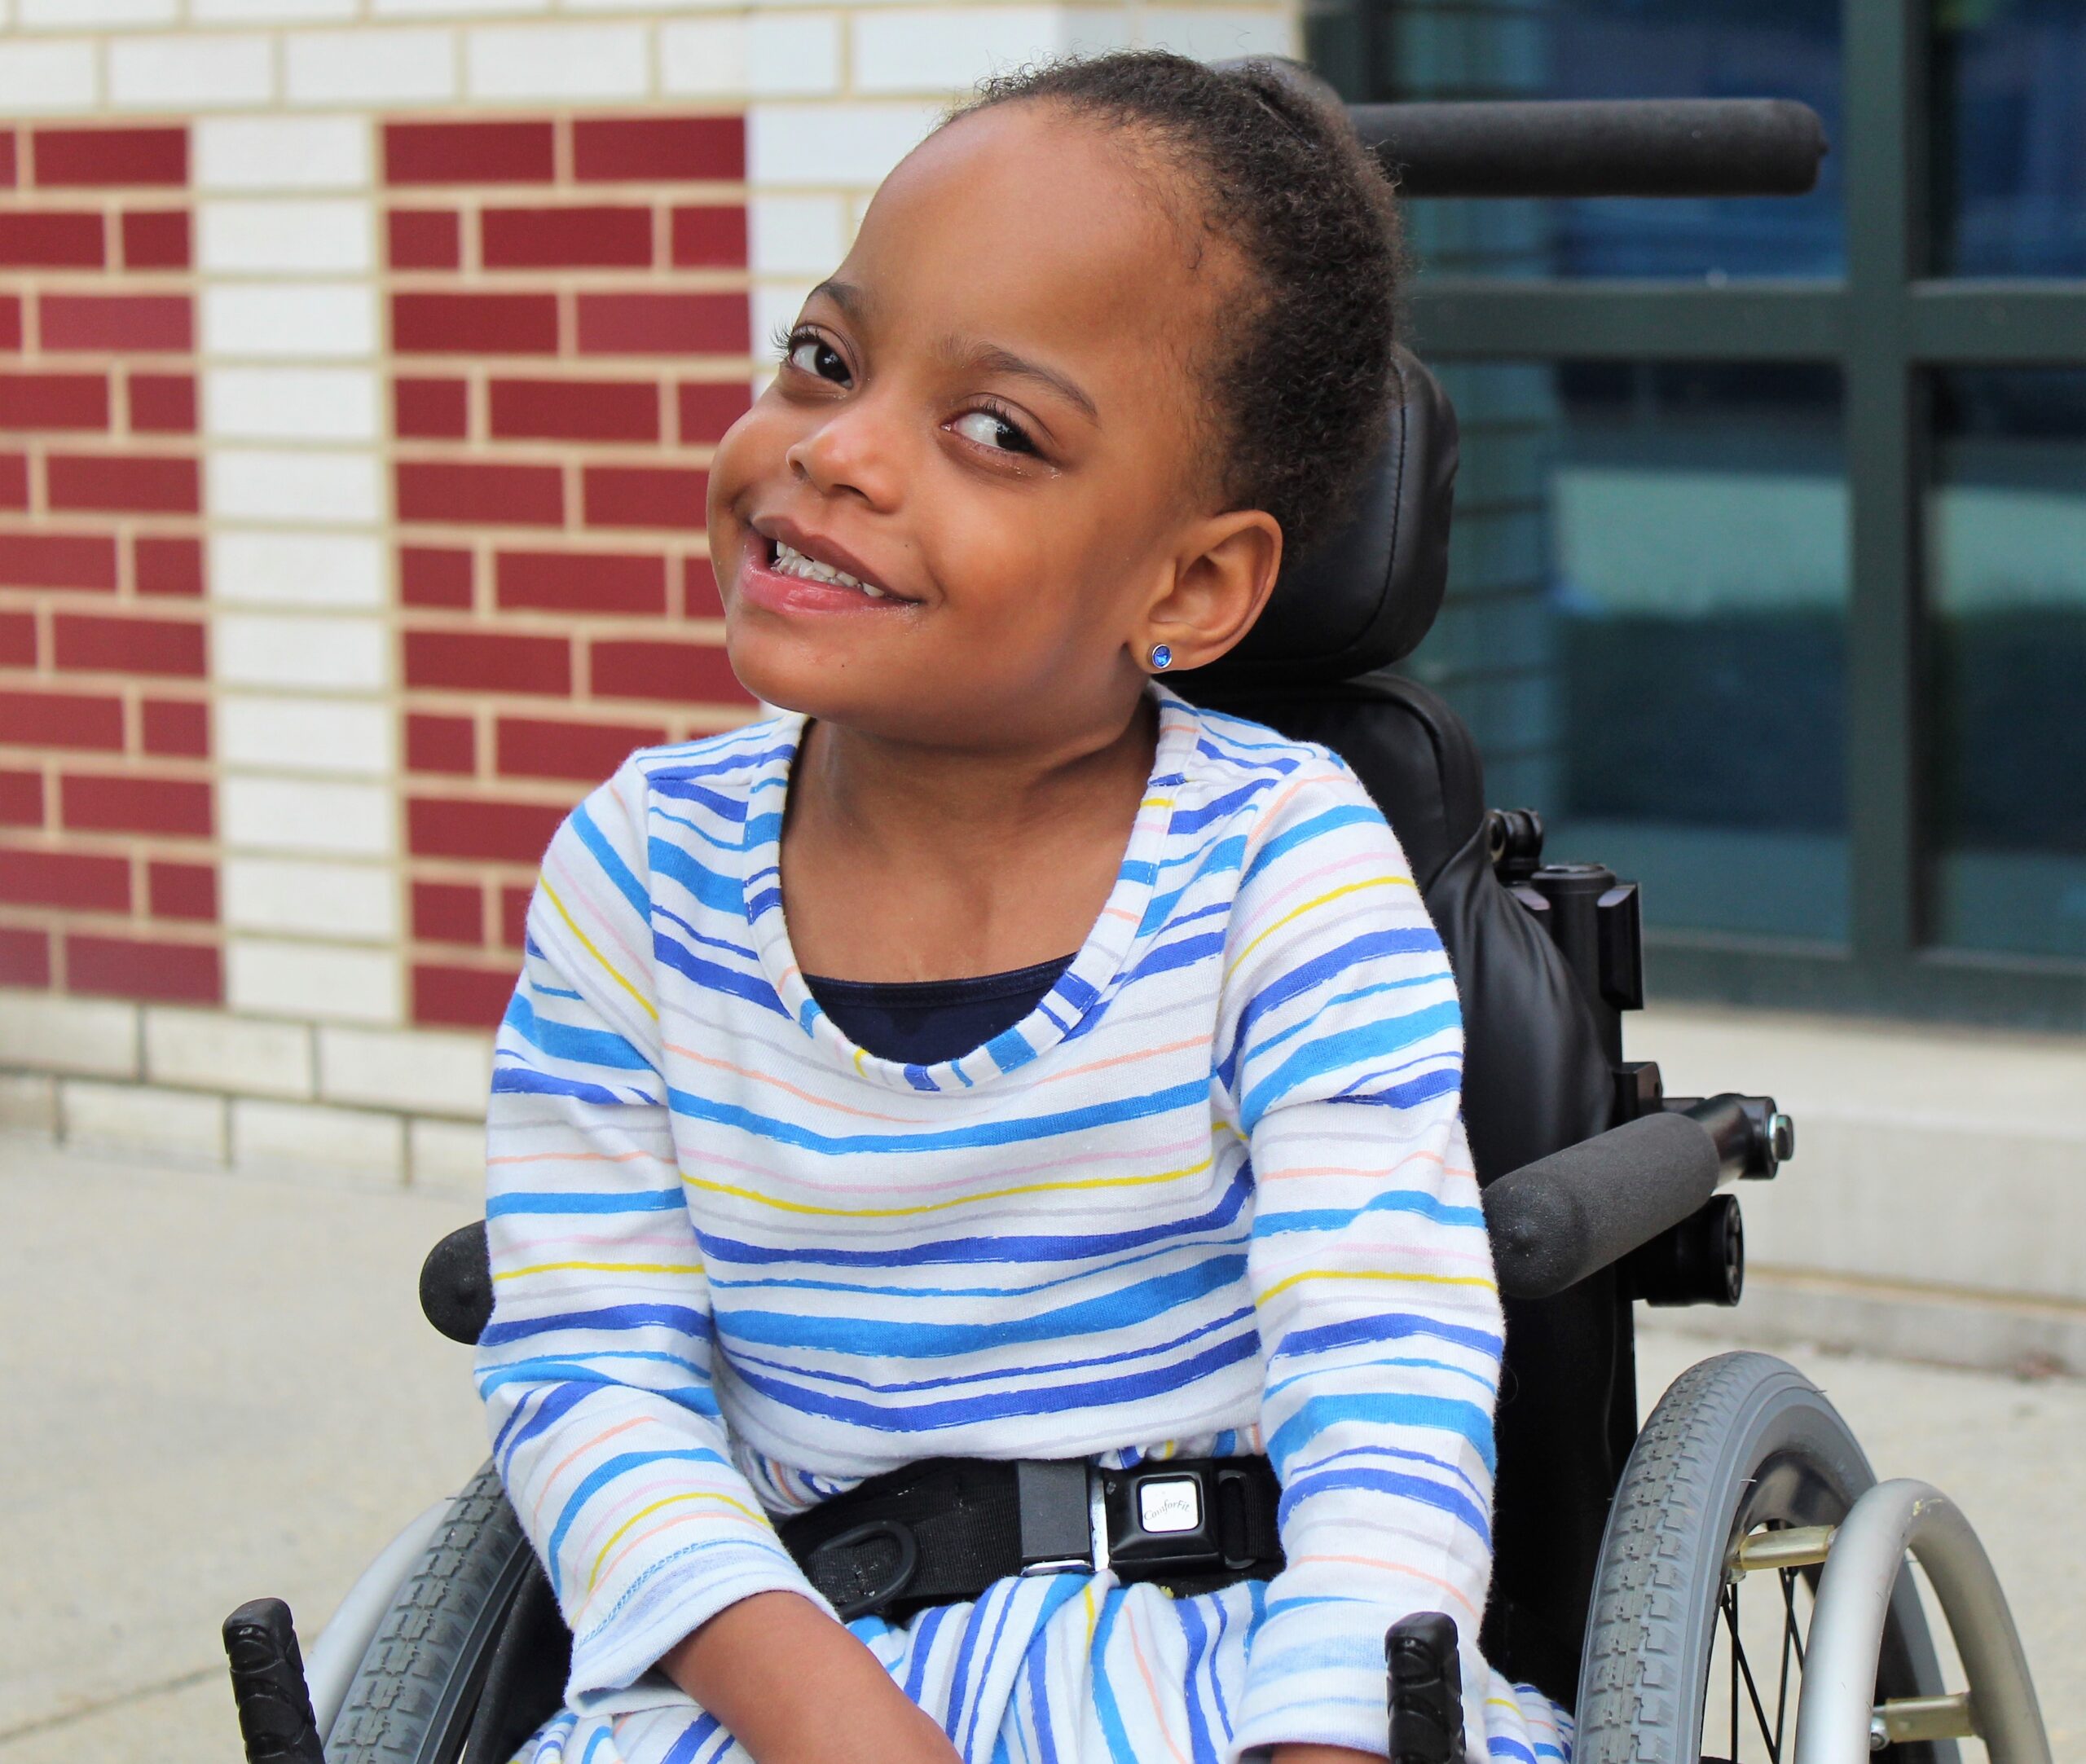 Young student on a wheelchair